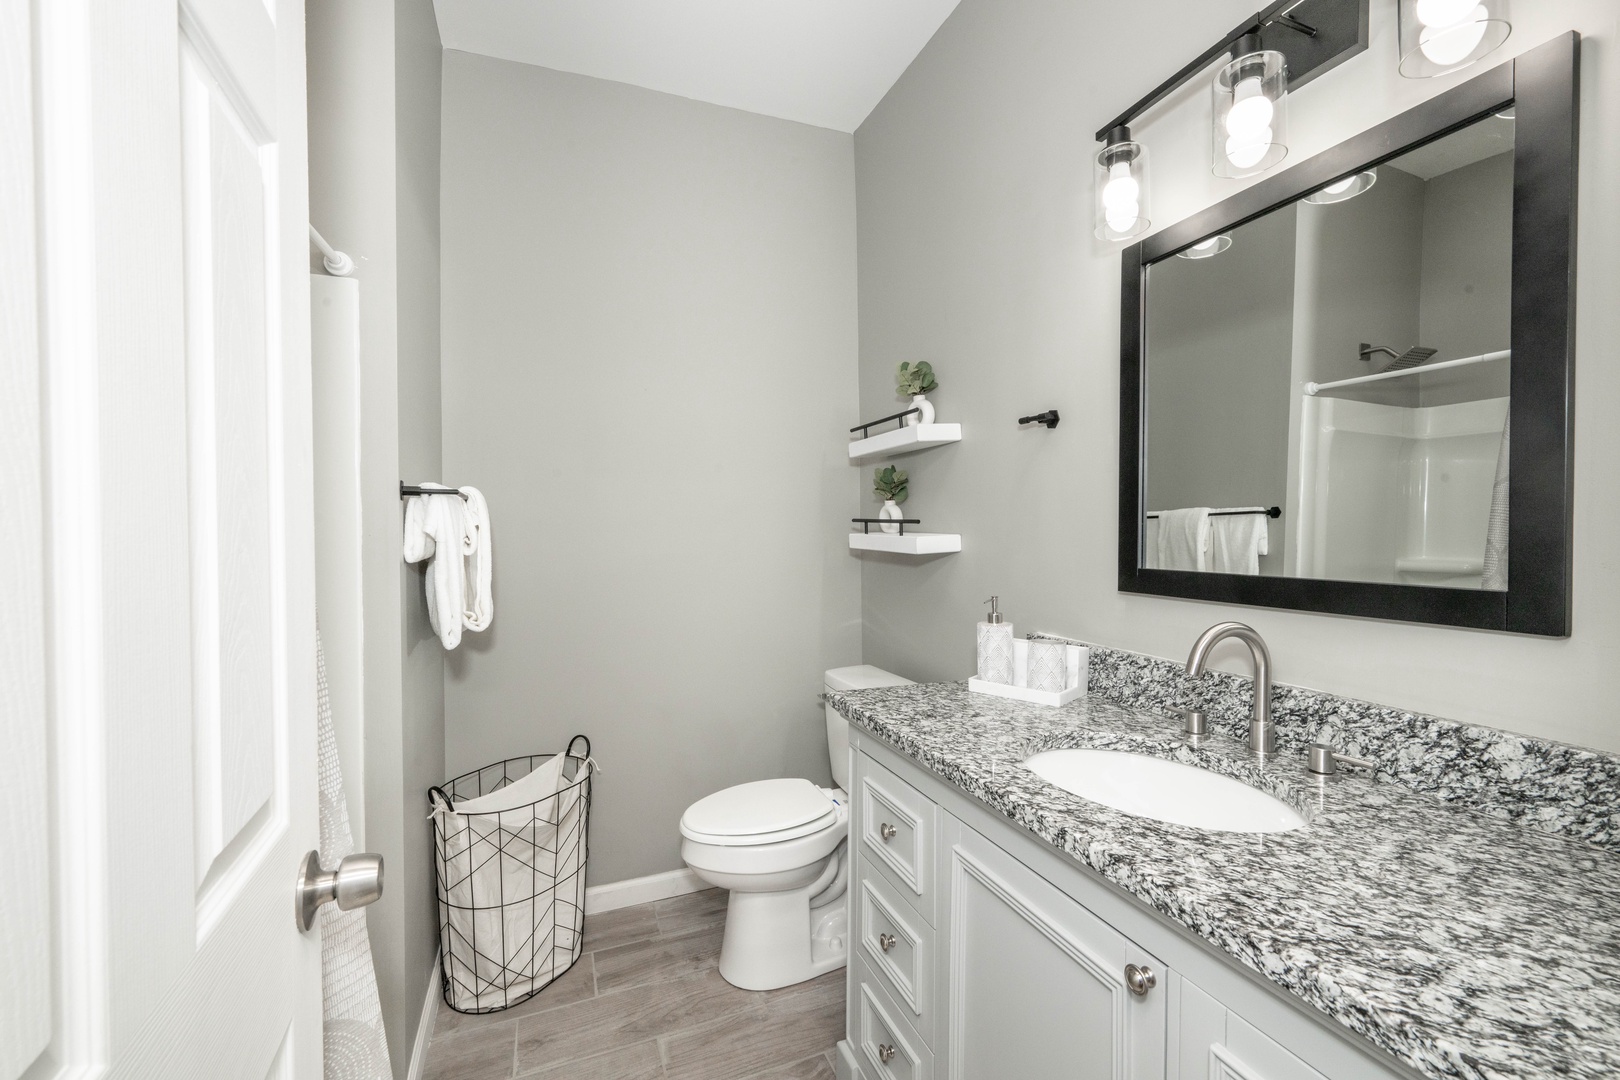 The 2nd floor full bath offers a spacious single vanity & shower/tub combo